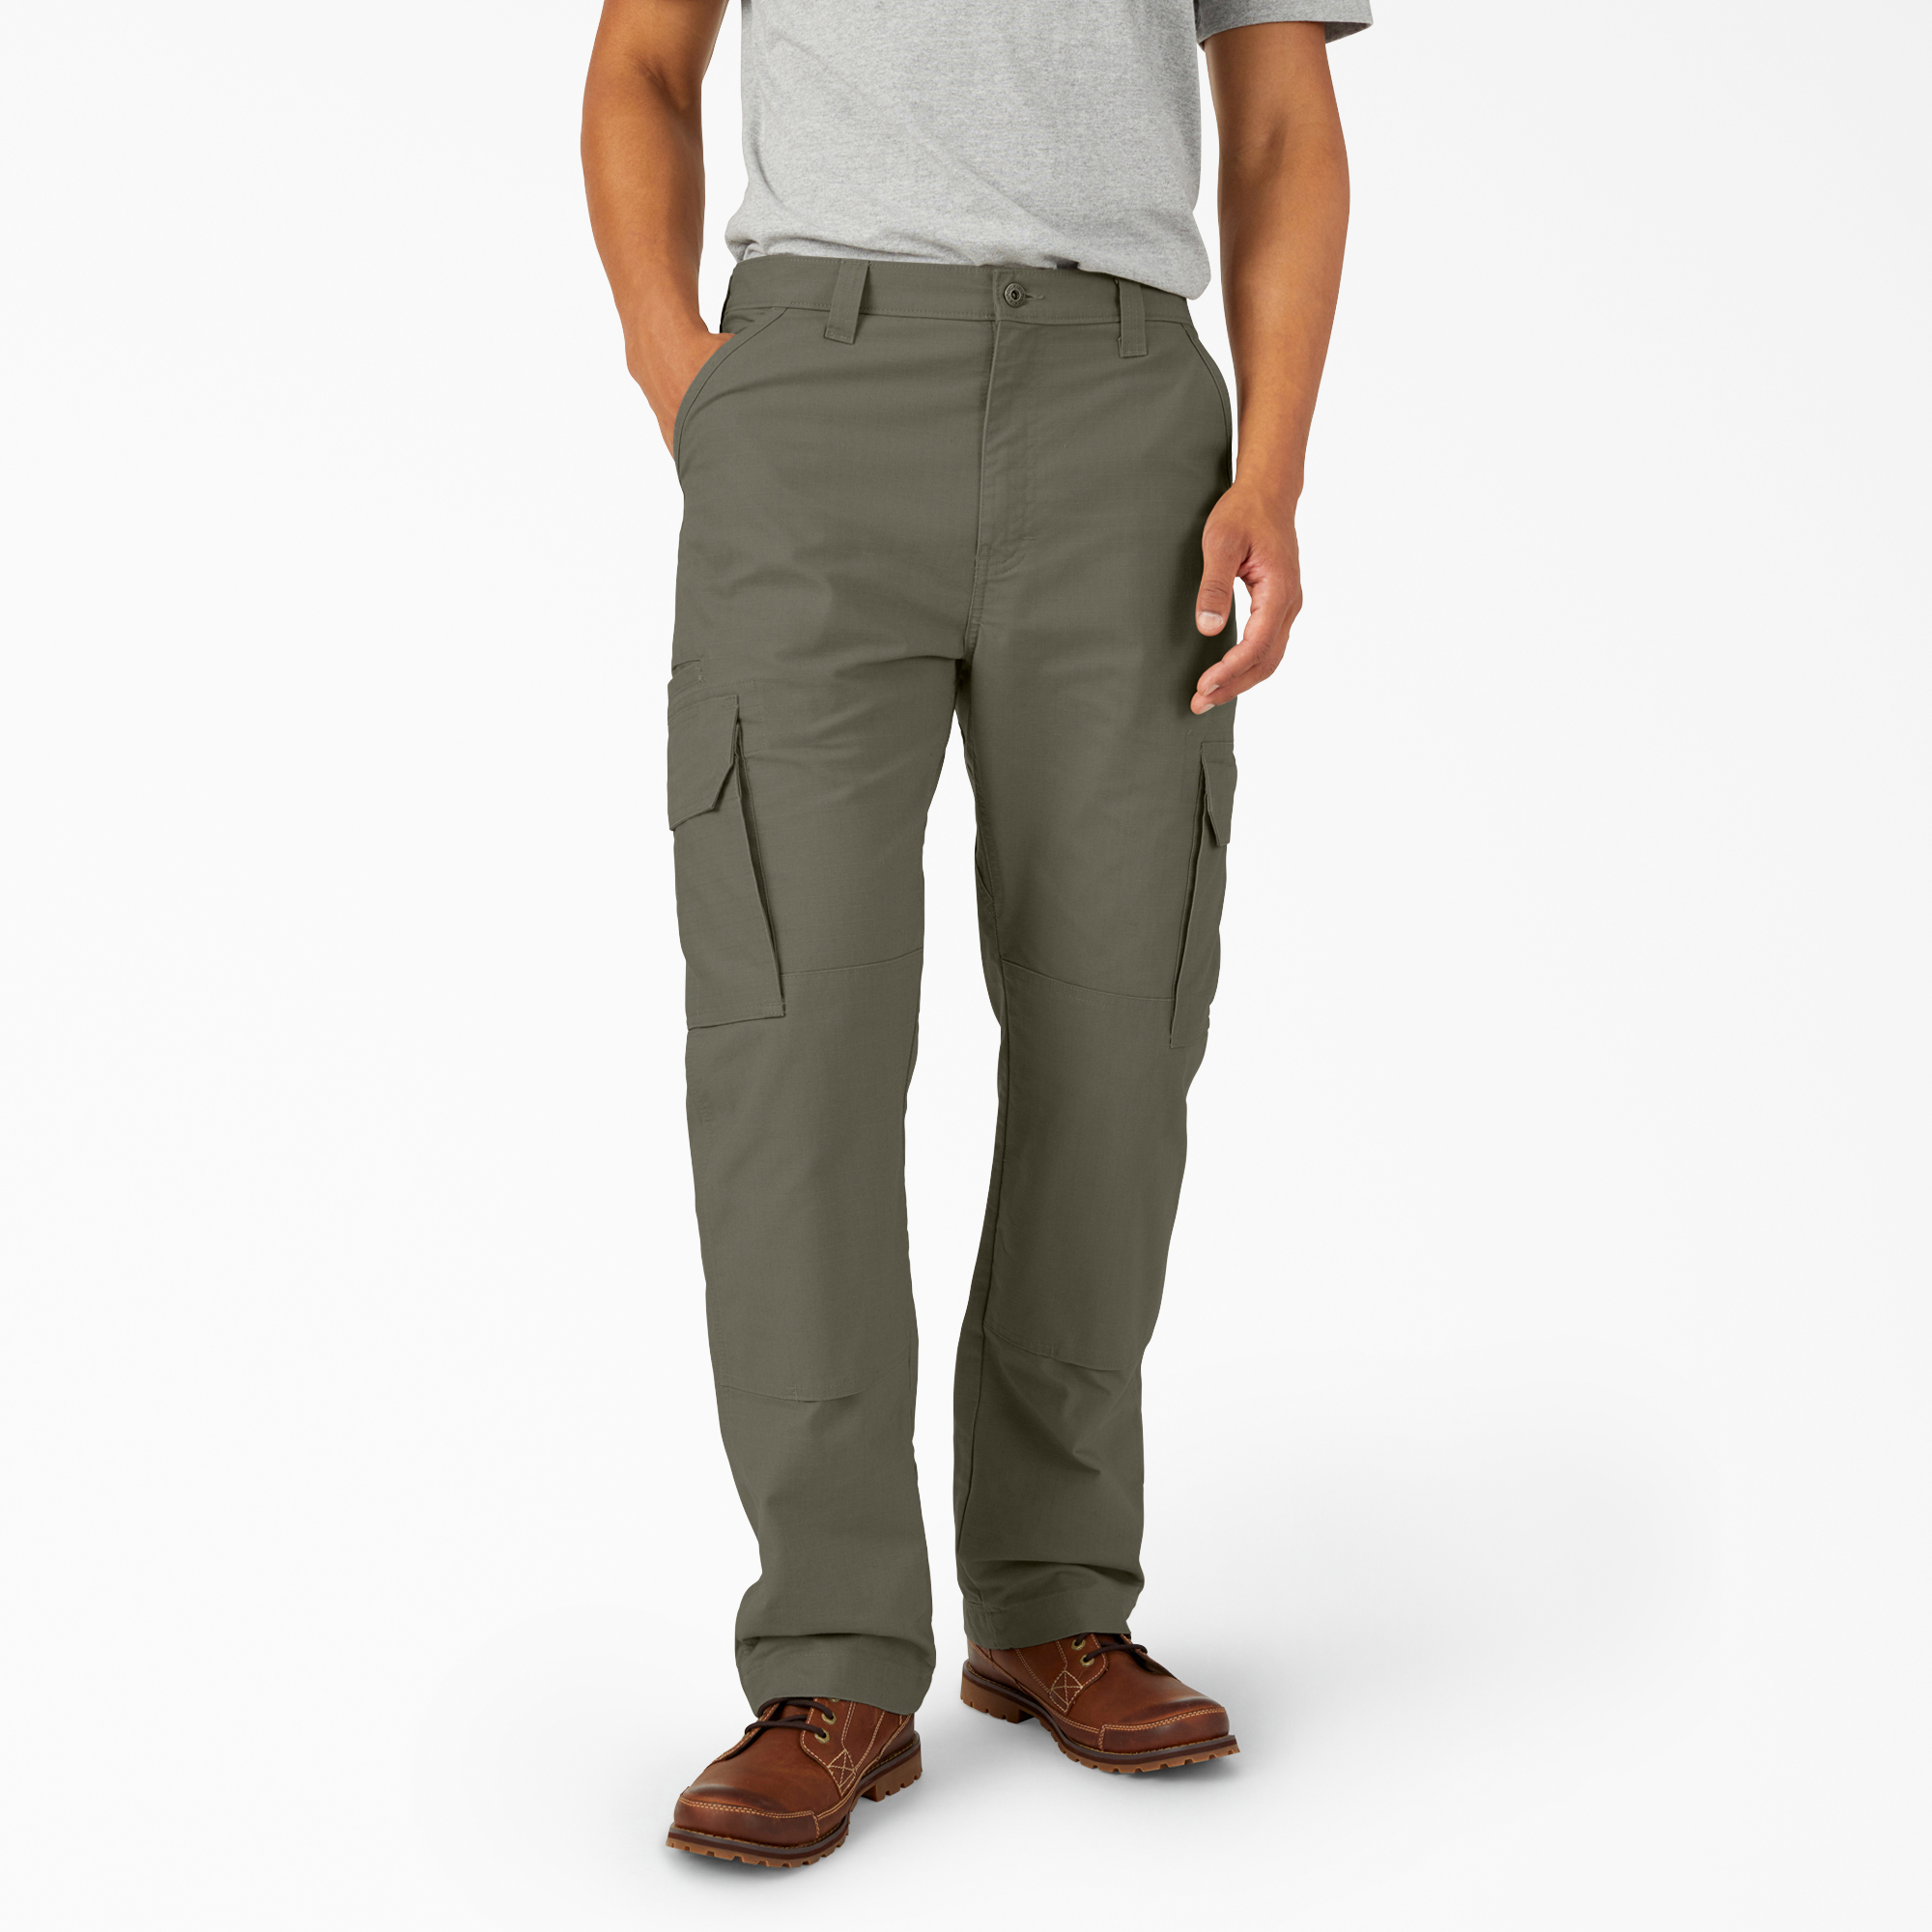 olive green cargo pants mens